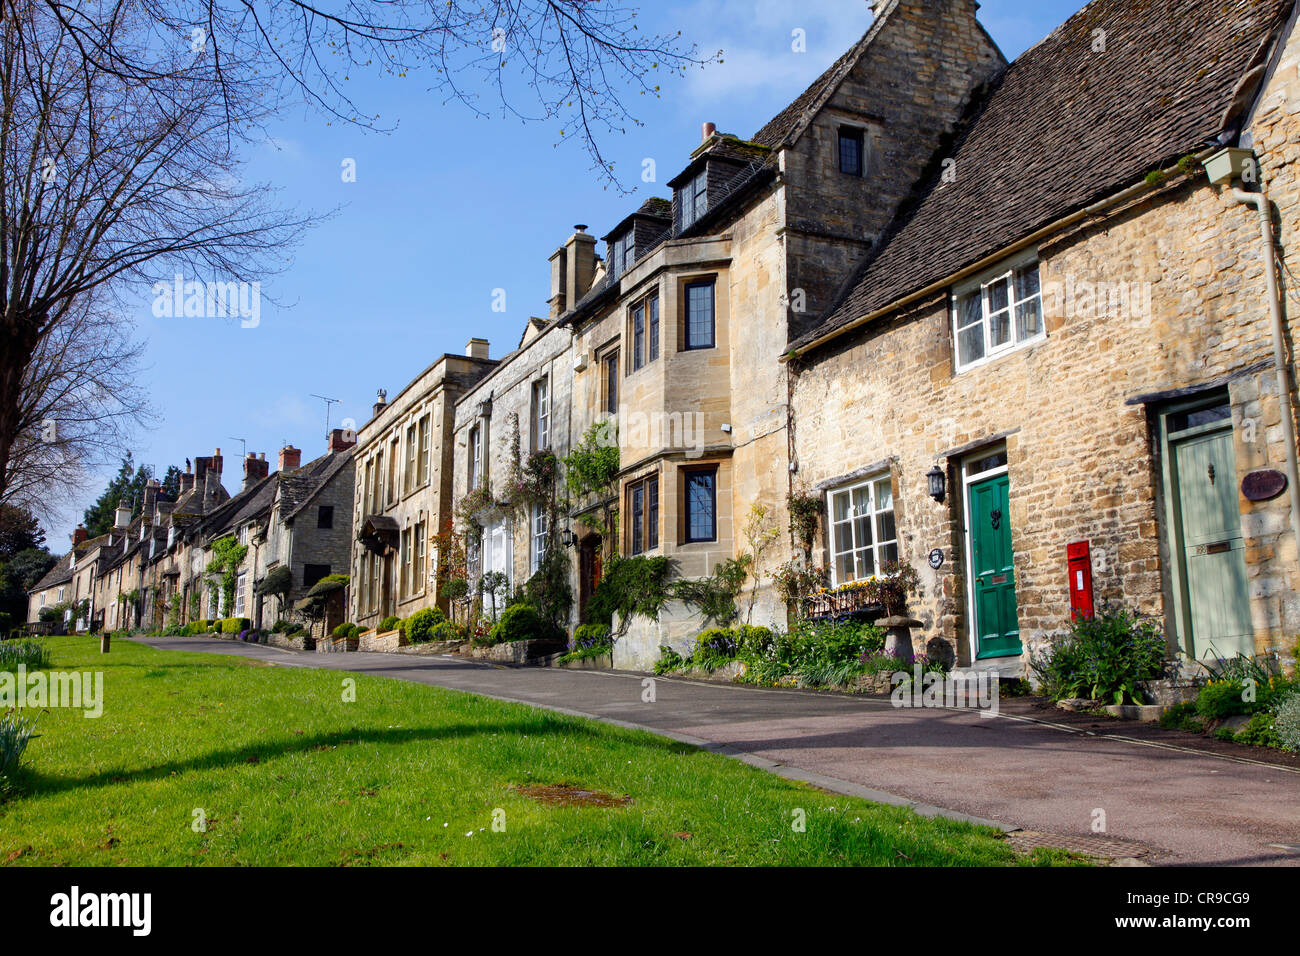 Burford, a small town on the River Windrush in the Cotswold Hills, minted by ancient stone houses. Burford, Oxfordshire, UK, Stock Photo